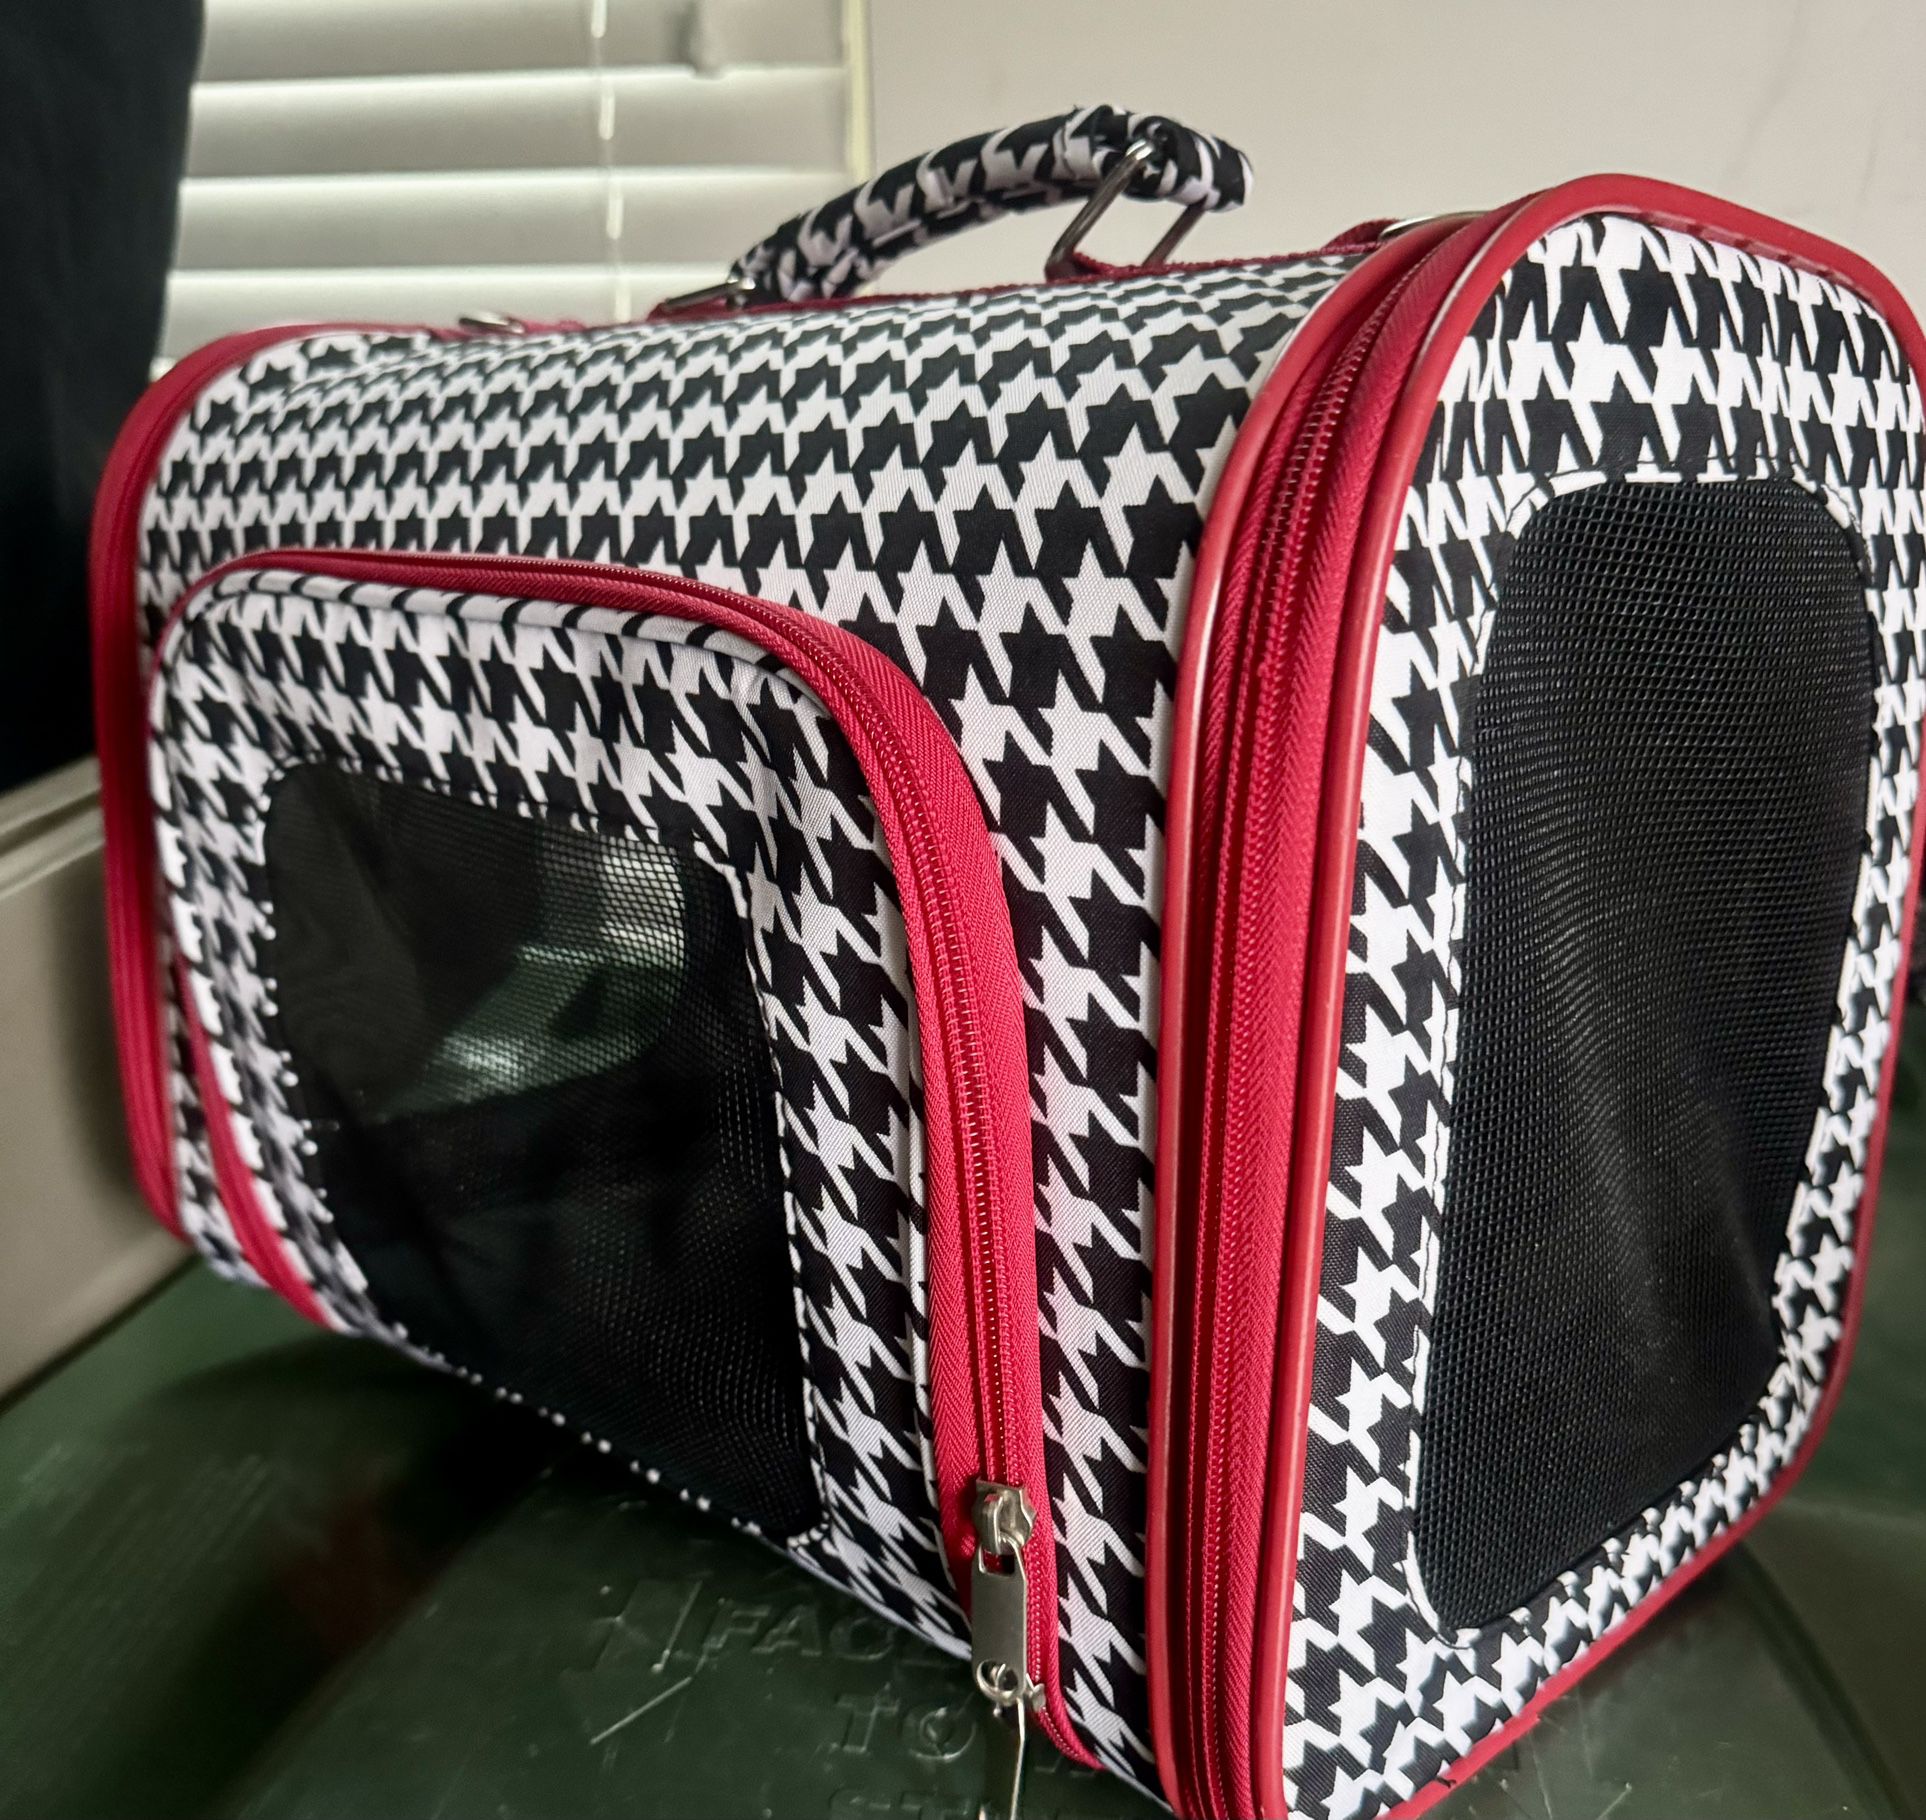 Black & White Houndstooth Fashion Transport Bag For Pets, 16”x11”x12”  